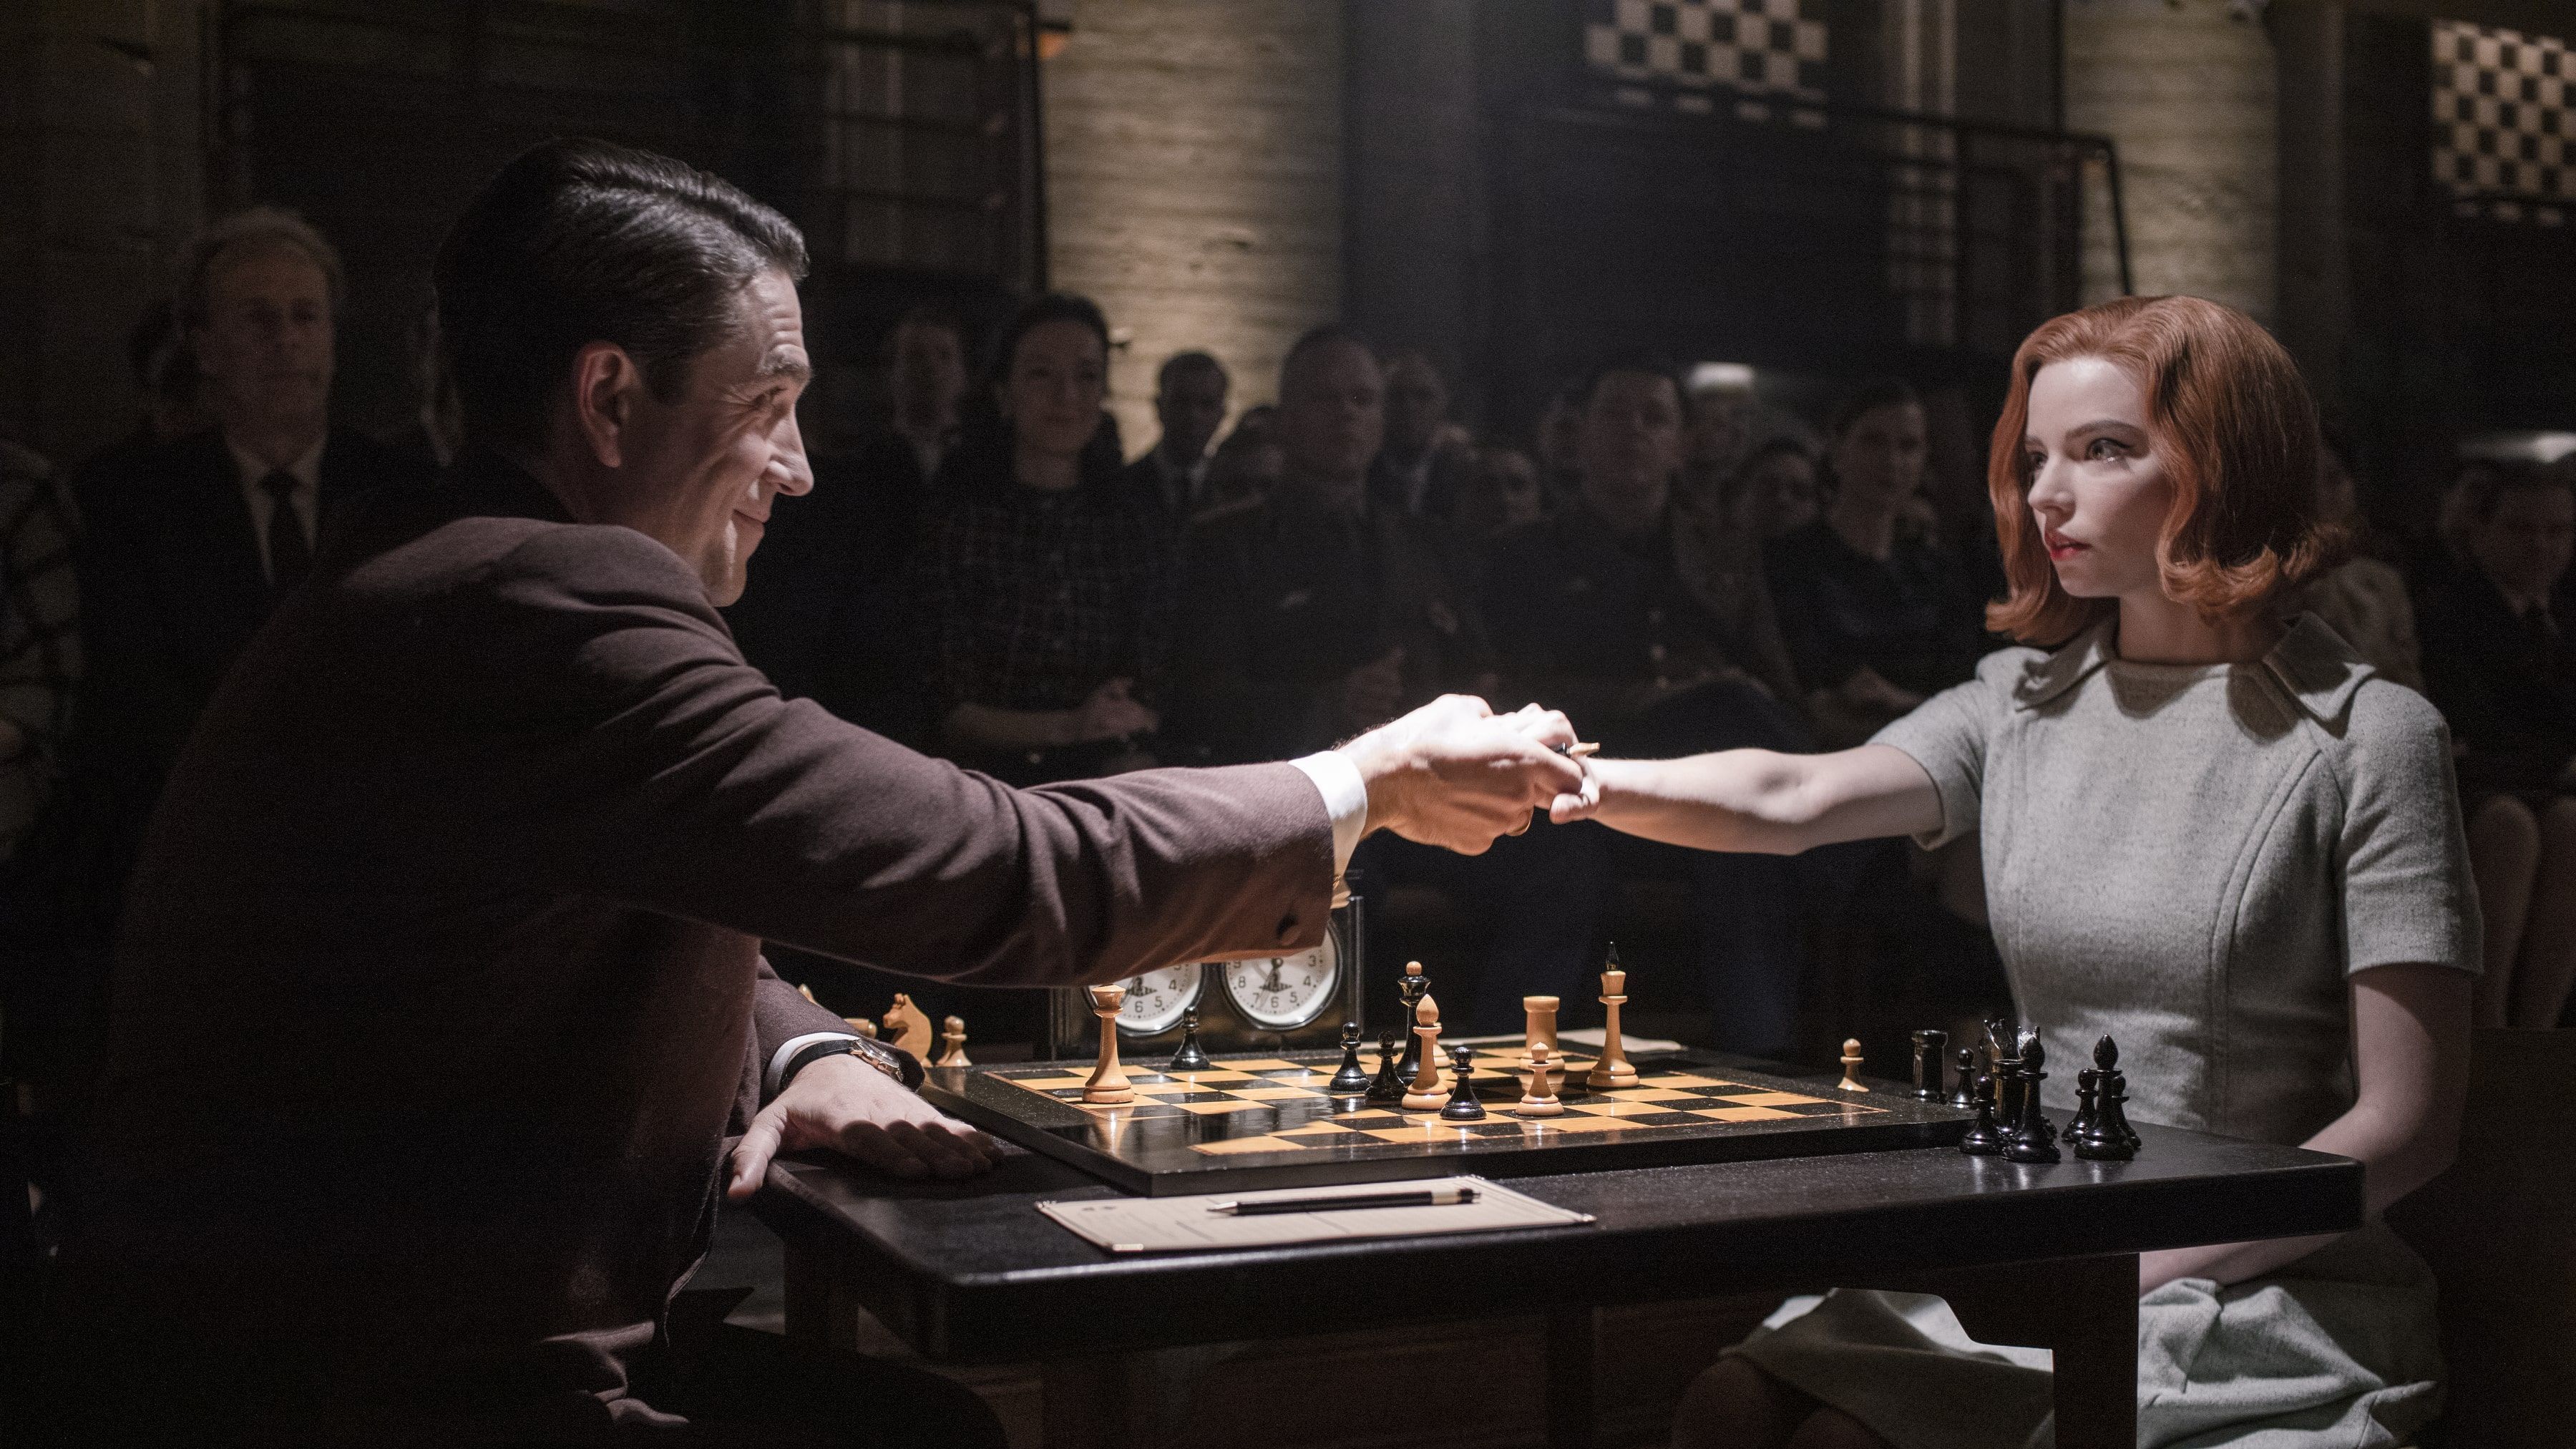 The Queen's Gambit Season 2: News, Cast, and Everything We Know So Far